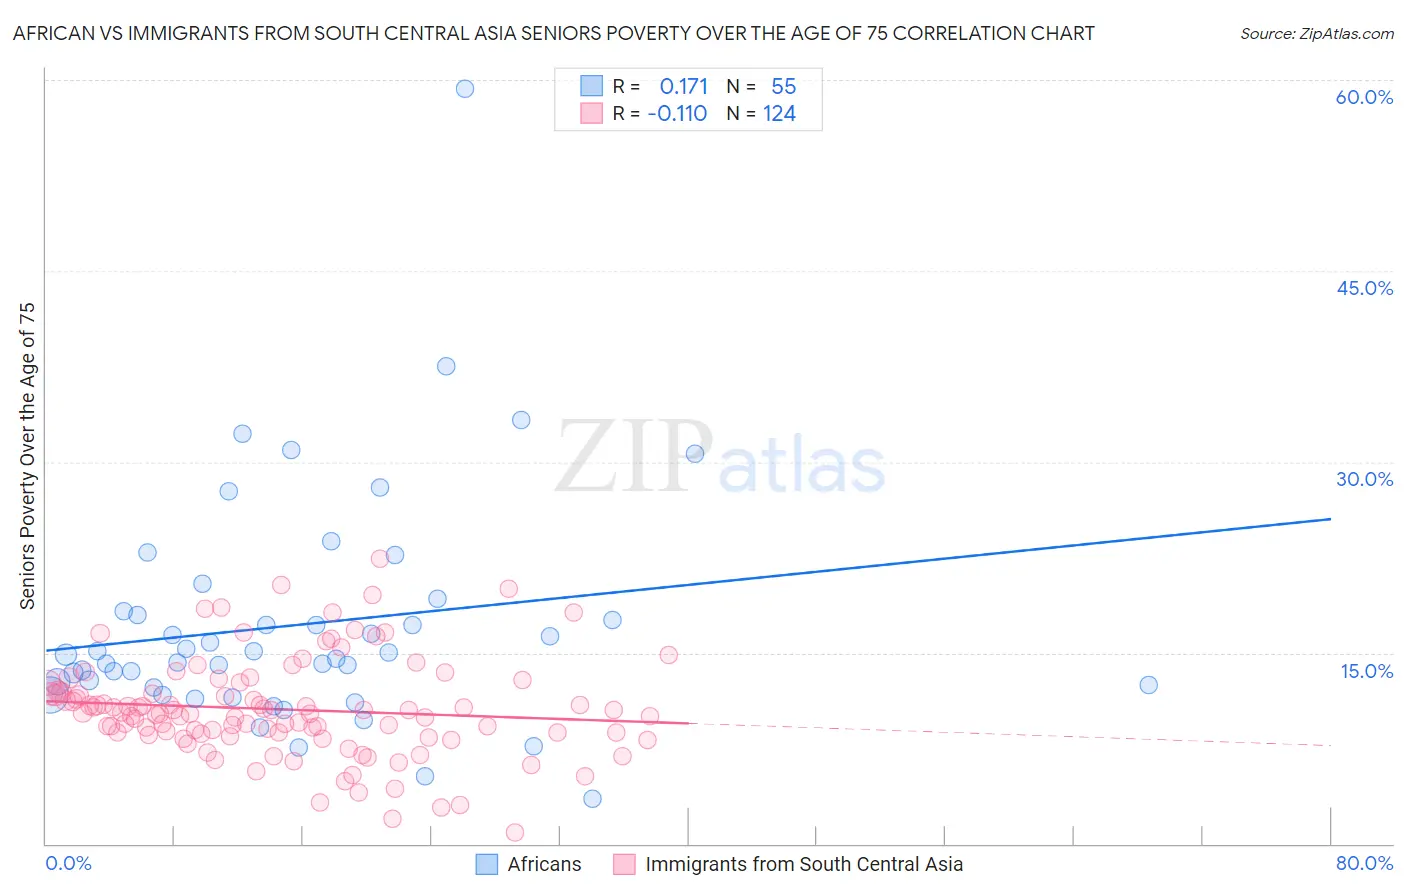 African vs Immigrants from South Central Asia Seniors Poverty Over the Age of 75